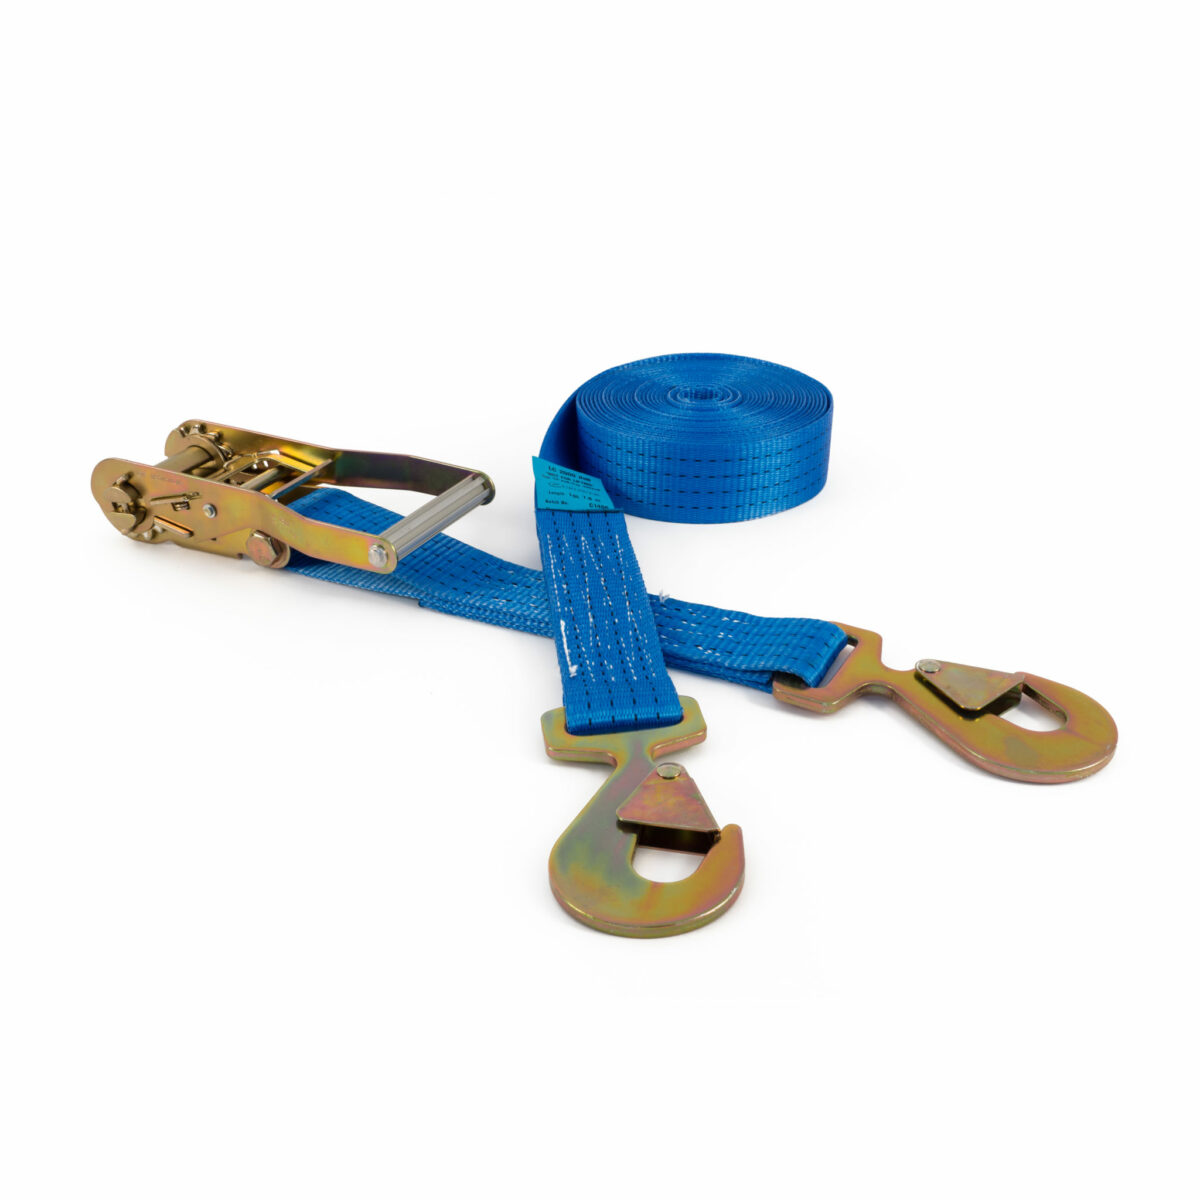 50mm Ratchet Straps with Flat Snap Hooks rated to 4000Kg - GTF